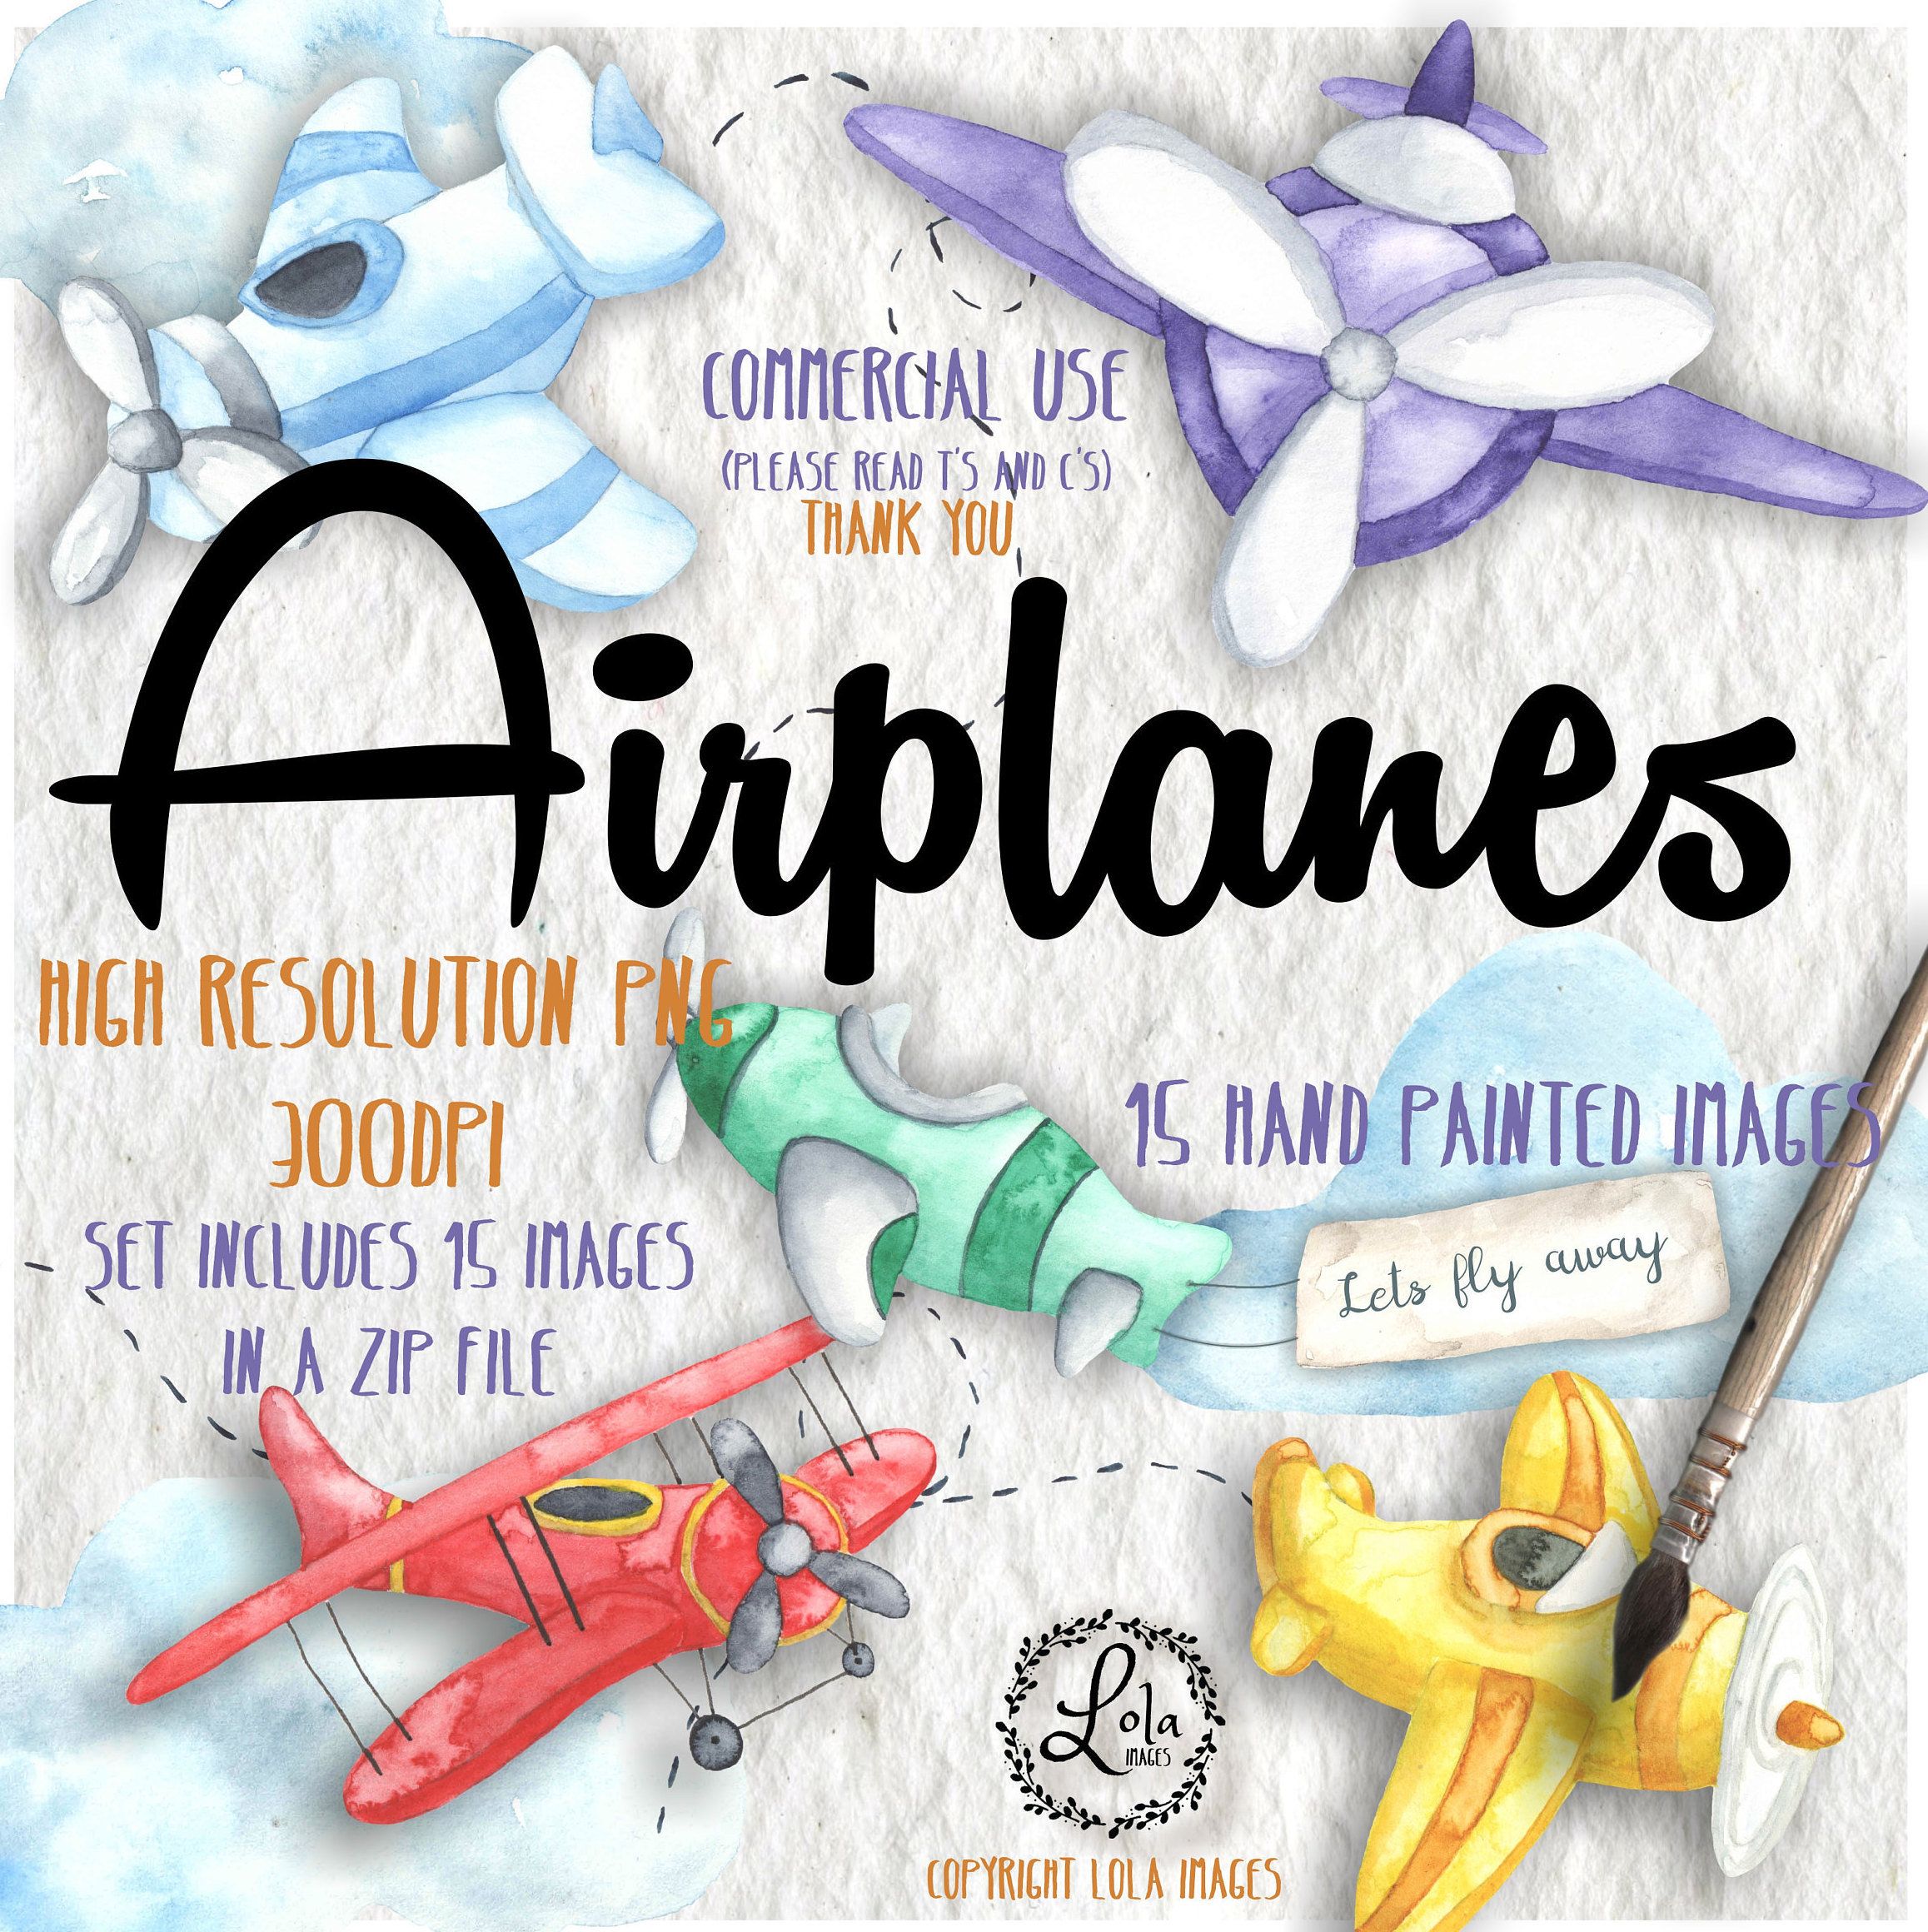 clipart airplane watercolor